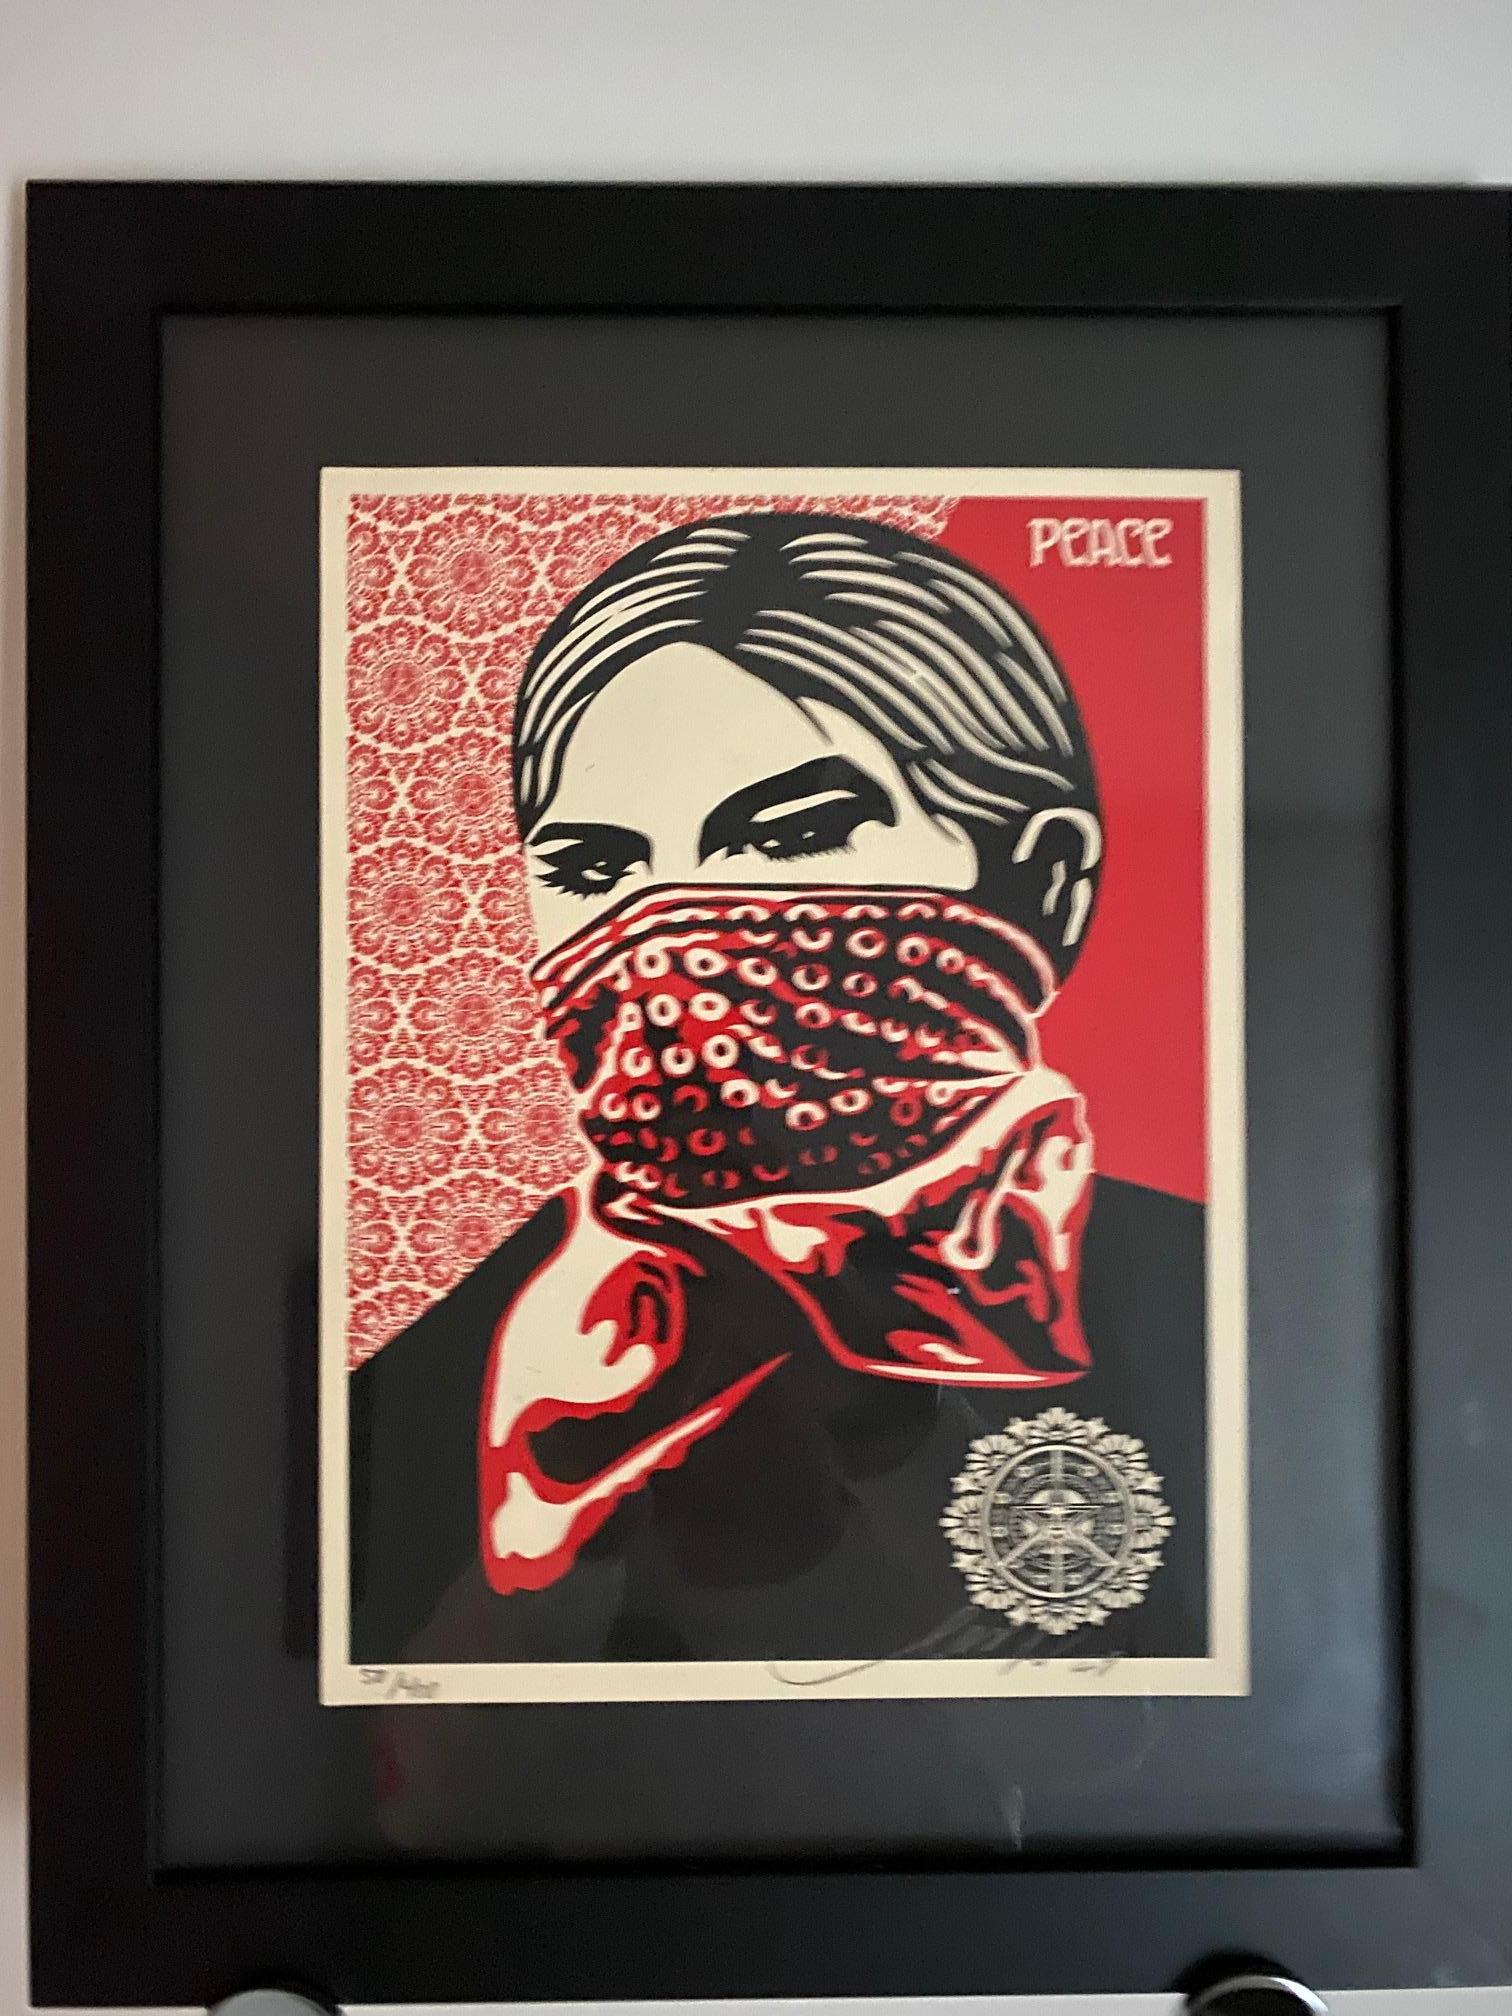 Paint Shepard Fairey Supply and Demand 20th Anniversary signed and numbered Serigraphs